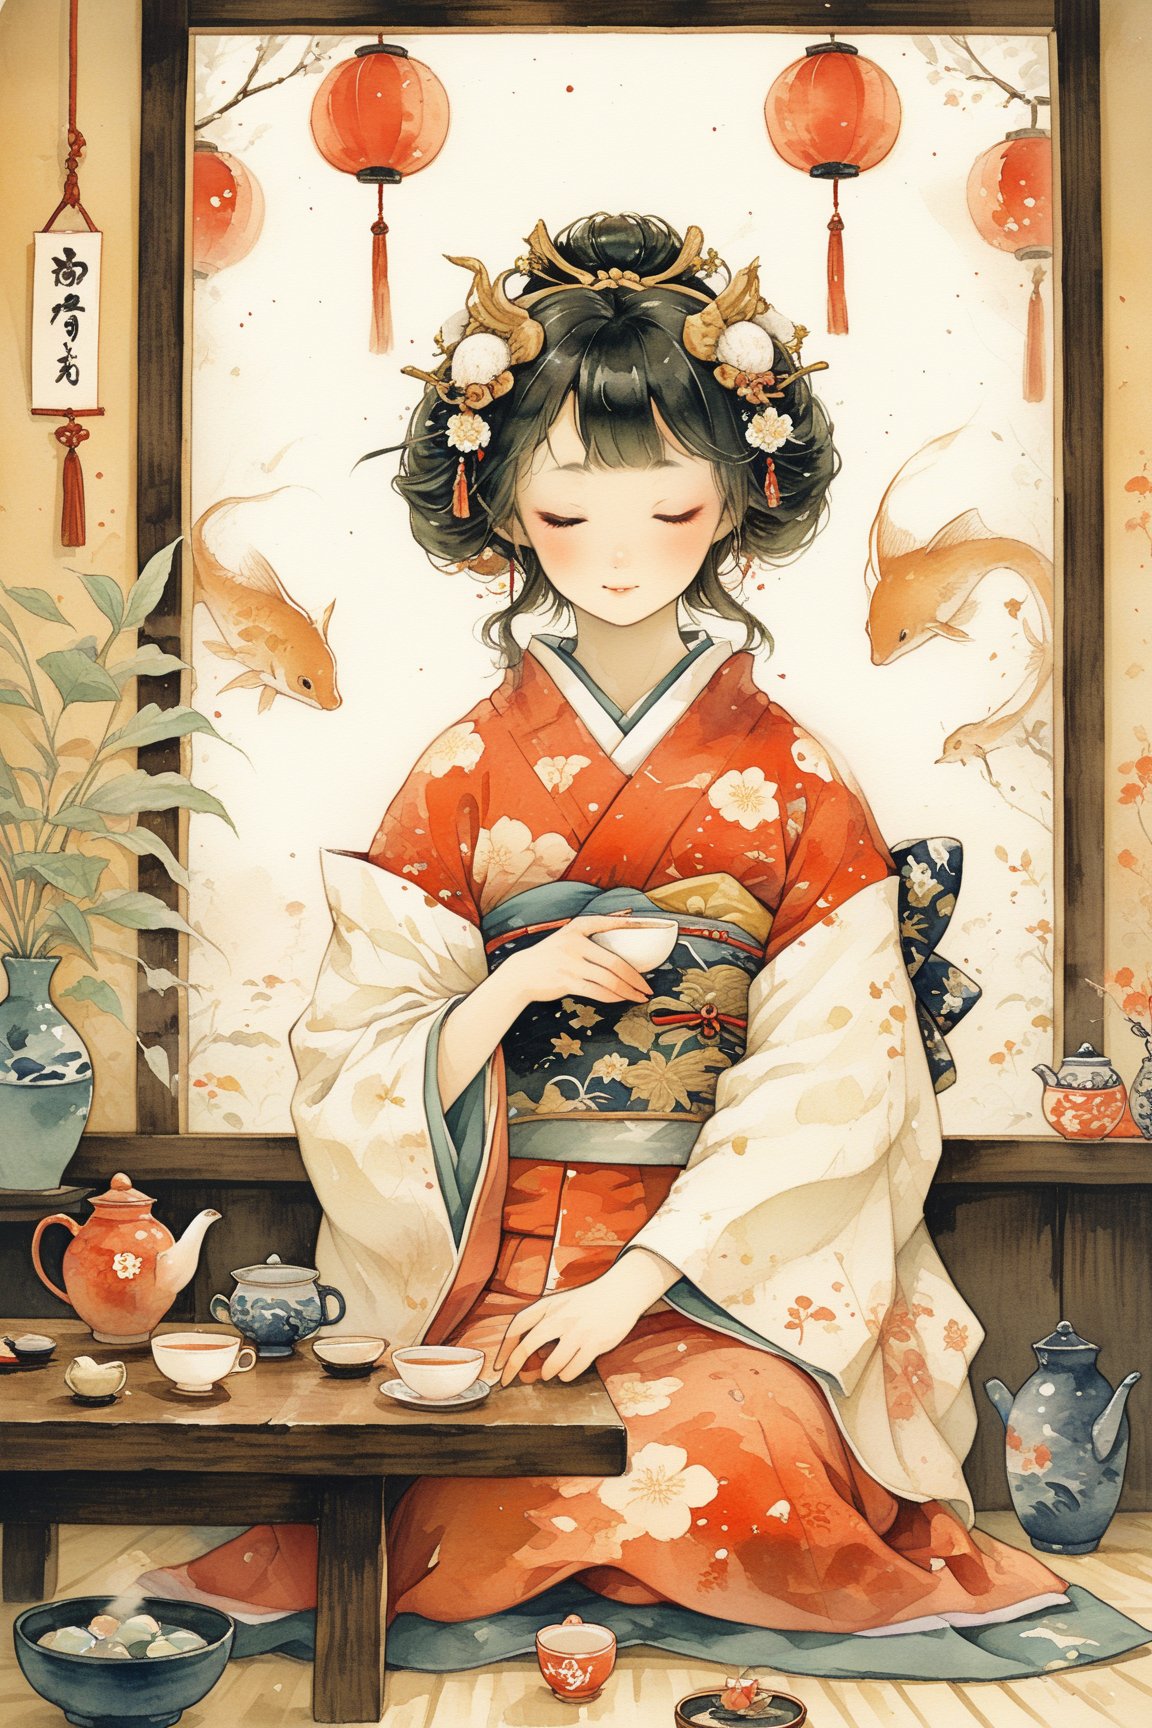 Here is the image of a woman wearing a traditional kimono, sitting in a Japanese-style room (washitsu), and drinking Japanese tea. The scene captures the serene and peaceful atmosphere beautifully. If there's anything more you'd like to add or adjust, feel free to let me know!